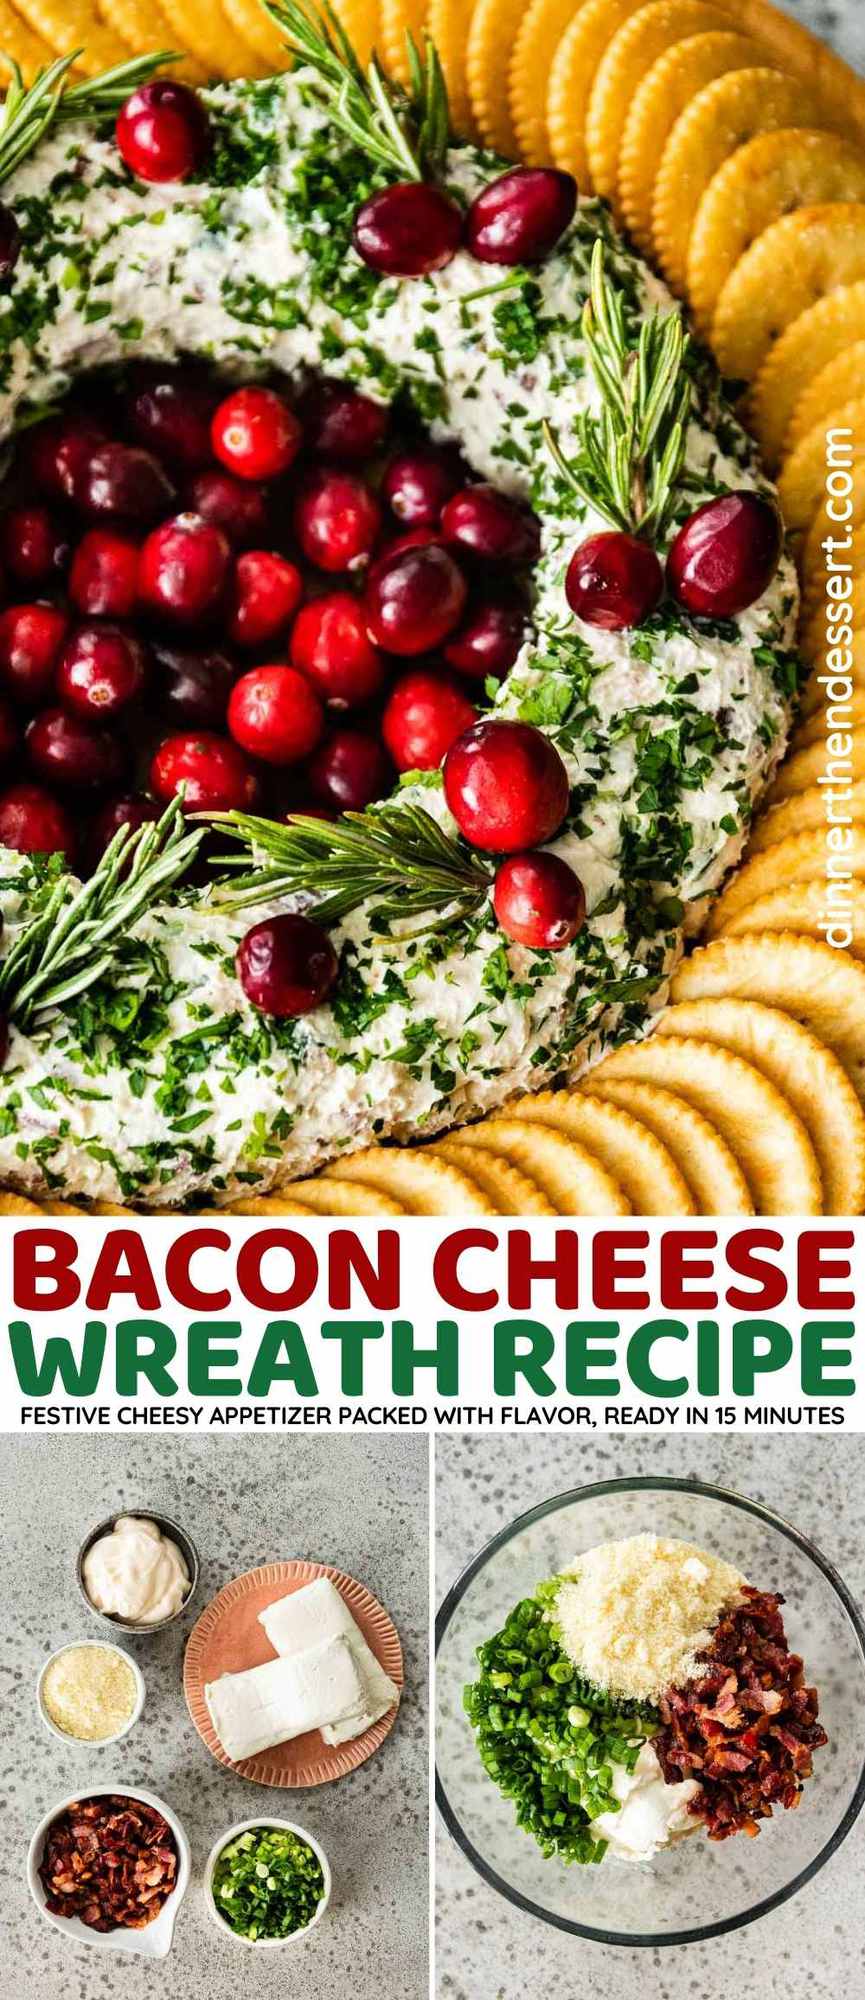 Bacon Cheese Wreath collage